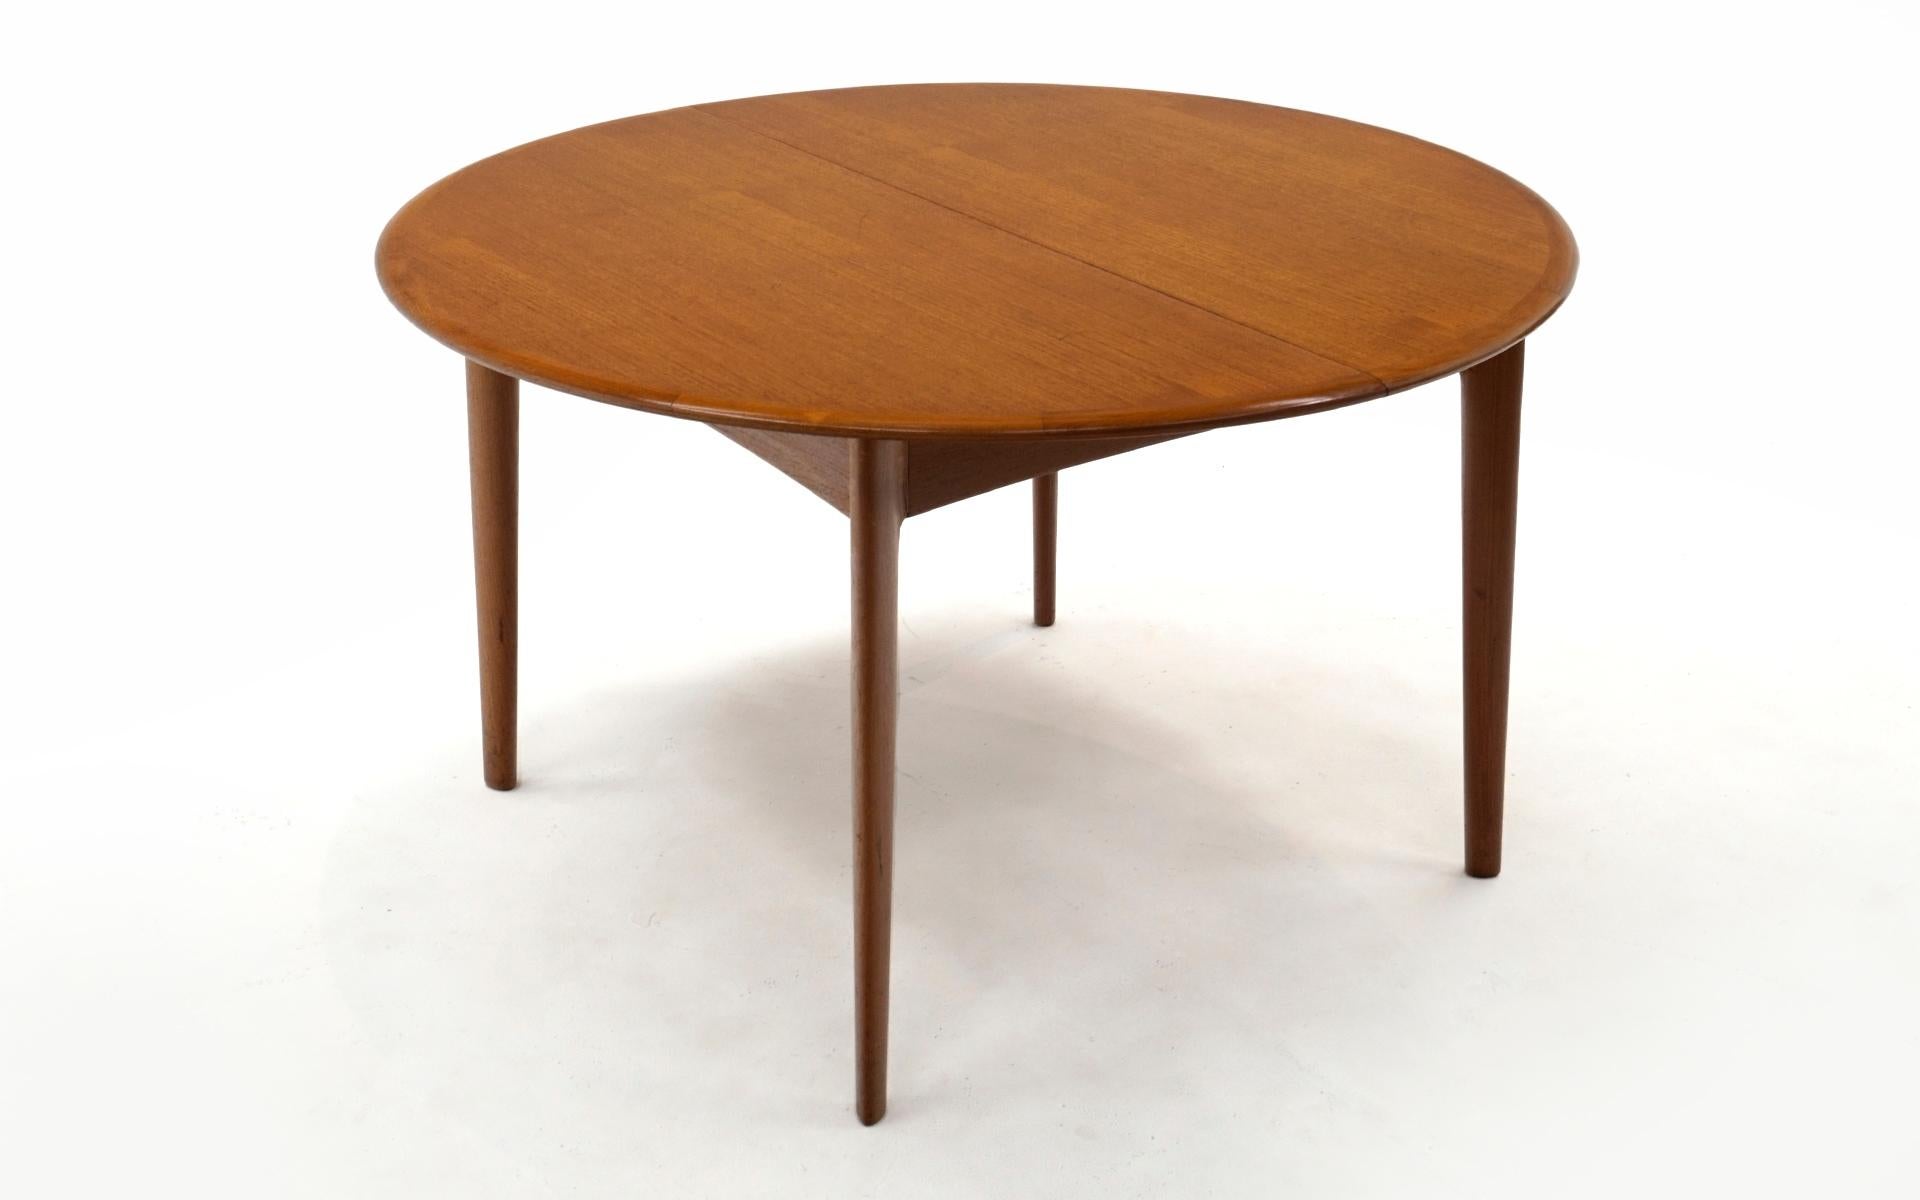 Round Expandable Danish Modern Teak Dining Table with Two Leaves, 1962, Original 4